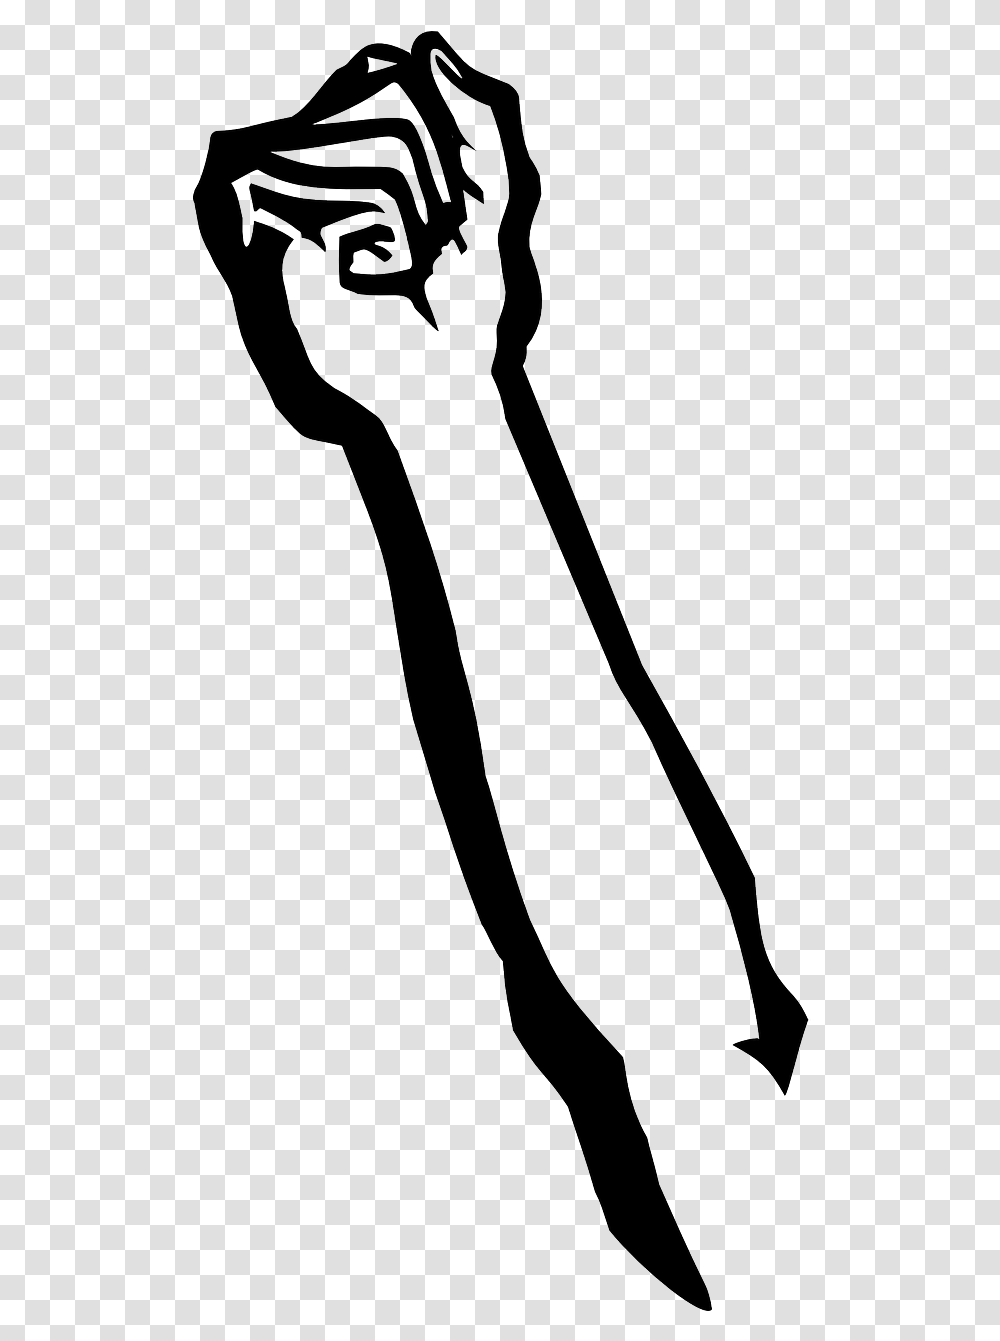 Fist In The Air Clip Art, Cutlery, Whip, Bow, Sweets Transparent Png